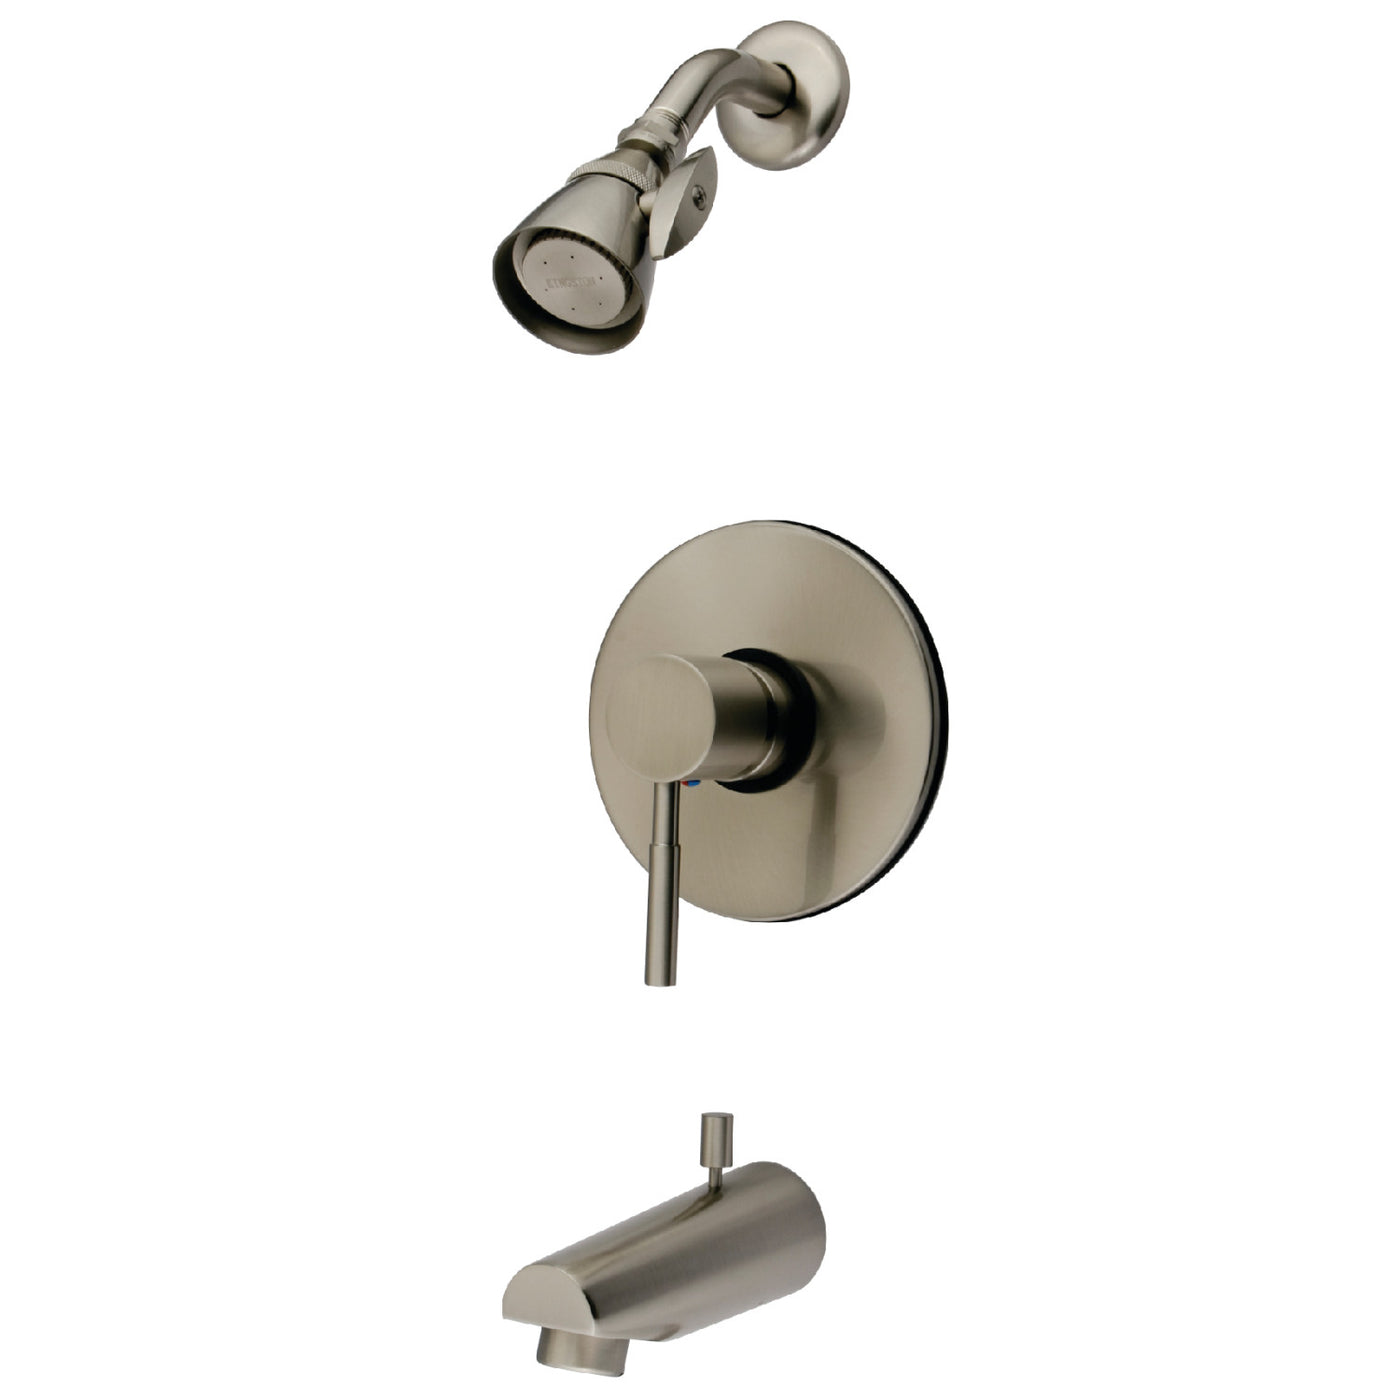 Elements of Design EB8698DL Tub and Shower Faucet, Brushed Nickel